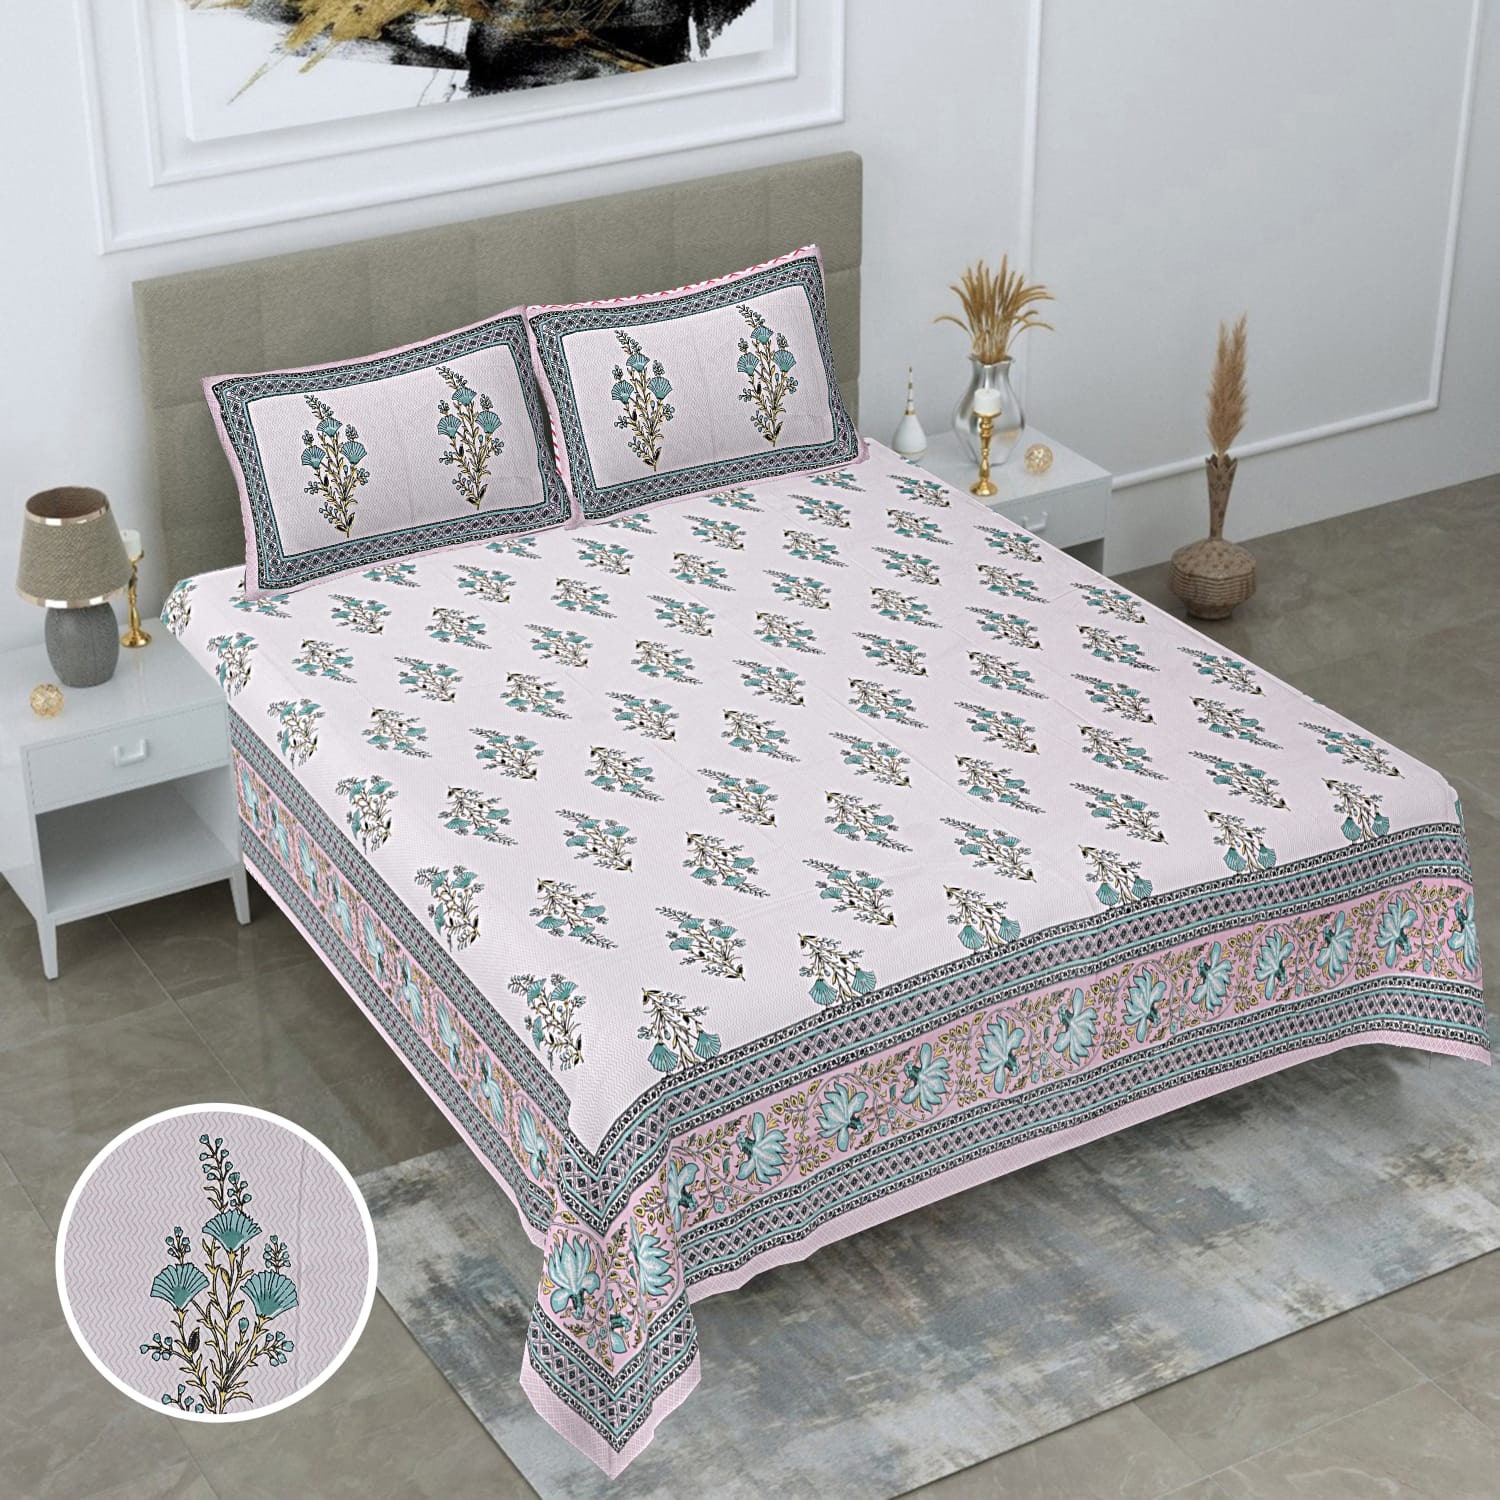 BEST Versace LV Inspired 3D Personalized Customized Bedding Sets